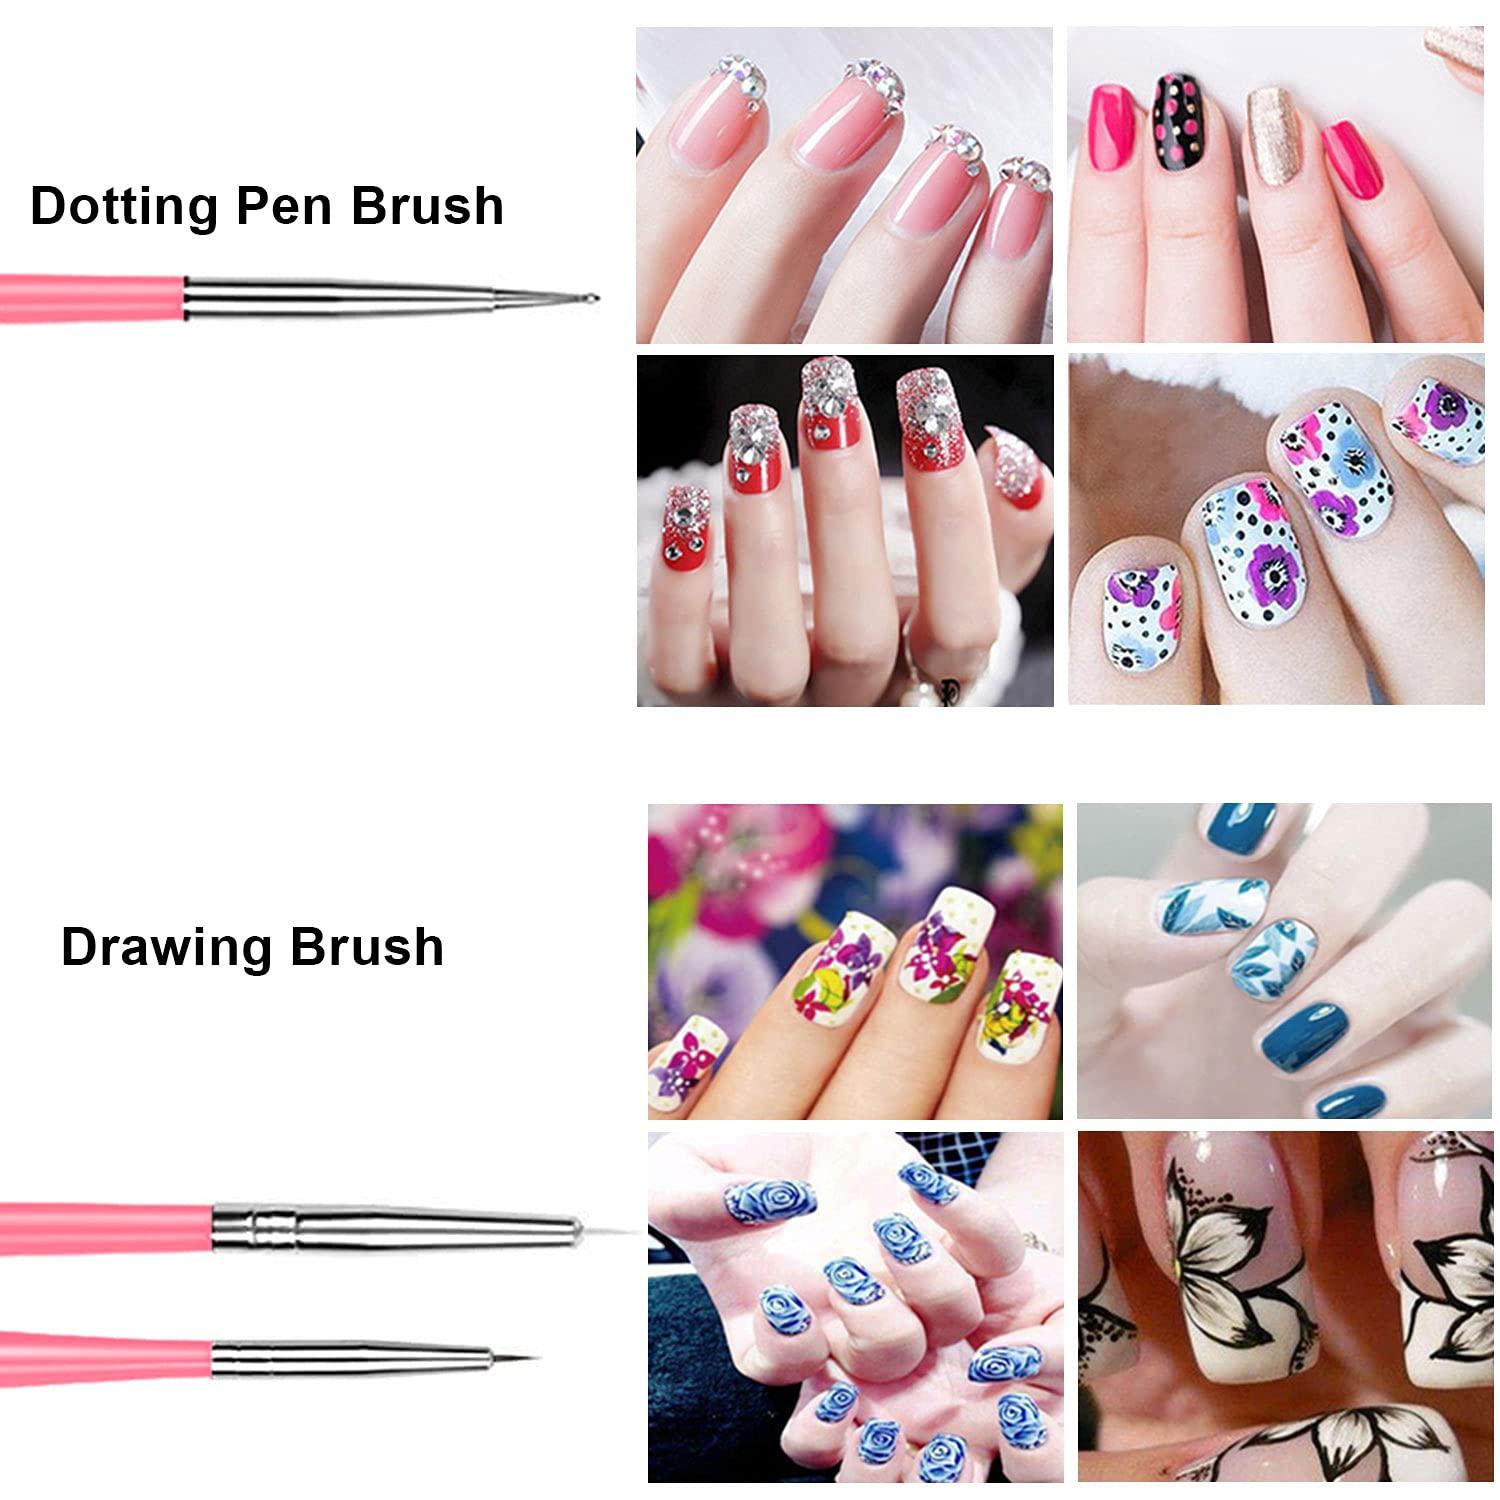 5pcs Nail Art Wood Acrylic Dotting Pen Nails for Painting Manicure and  Decoration tools